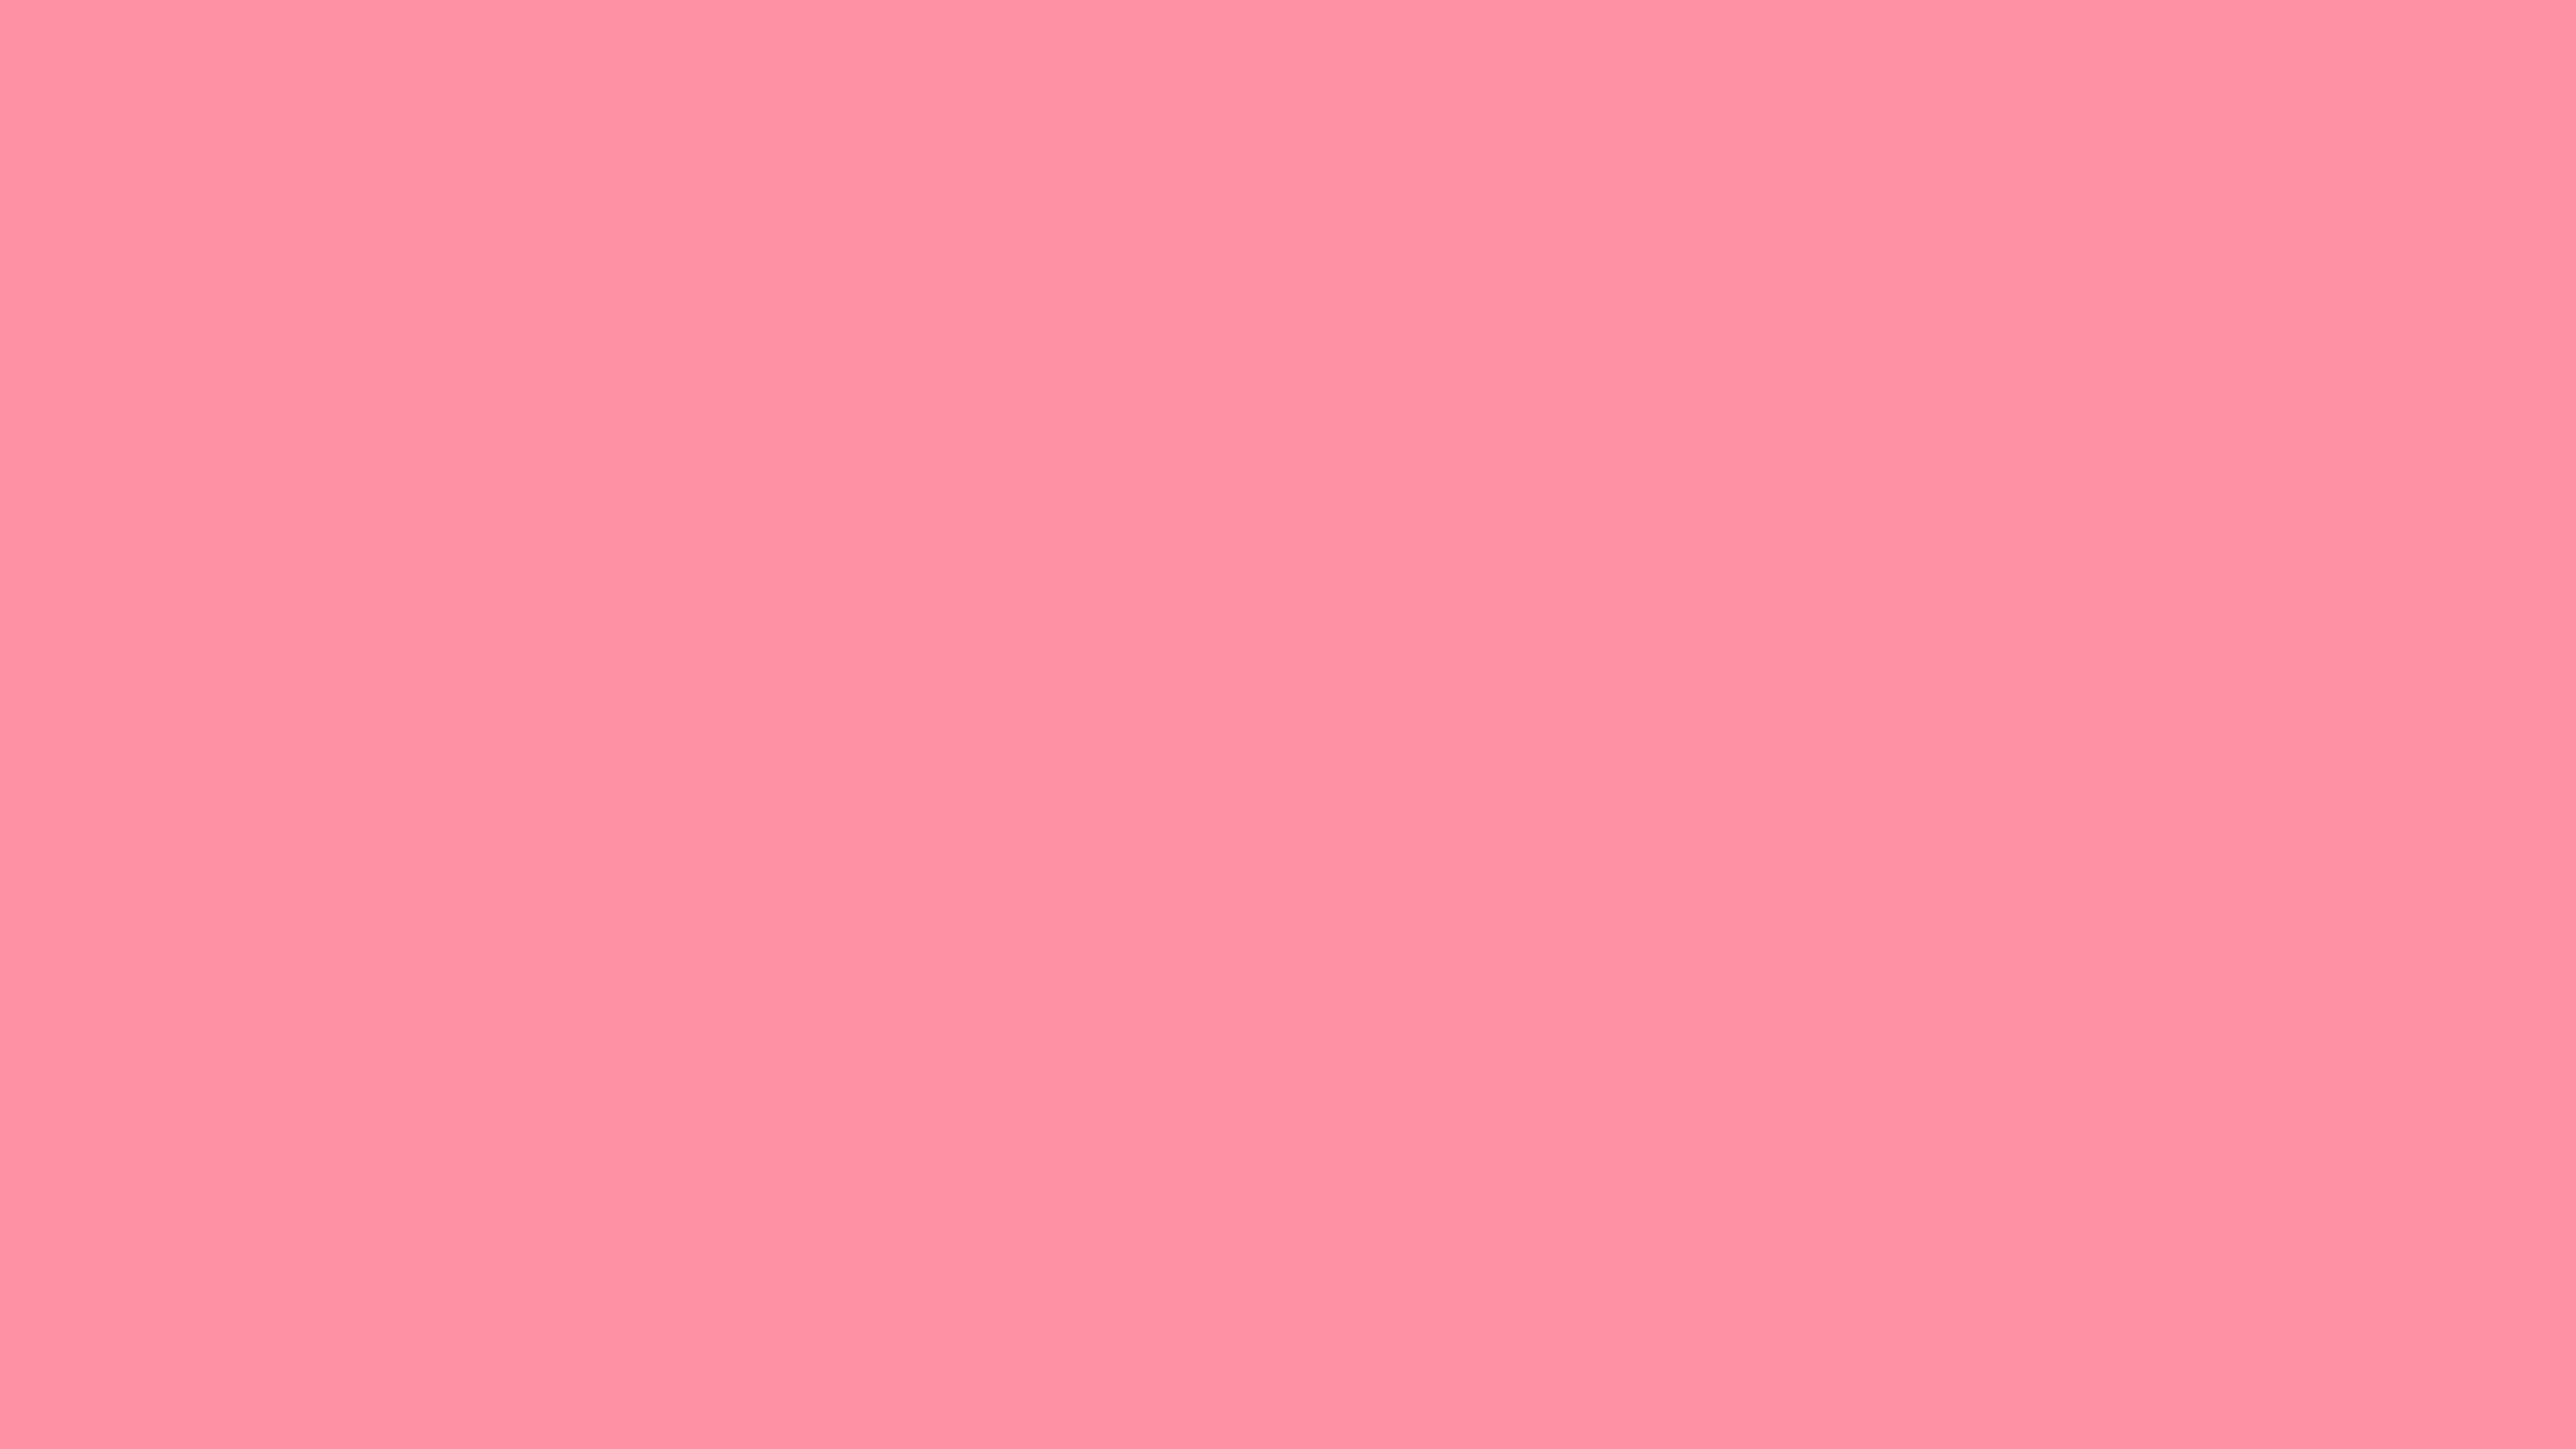 7680x4320 Salmon Pink Solid Color Background